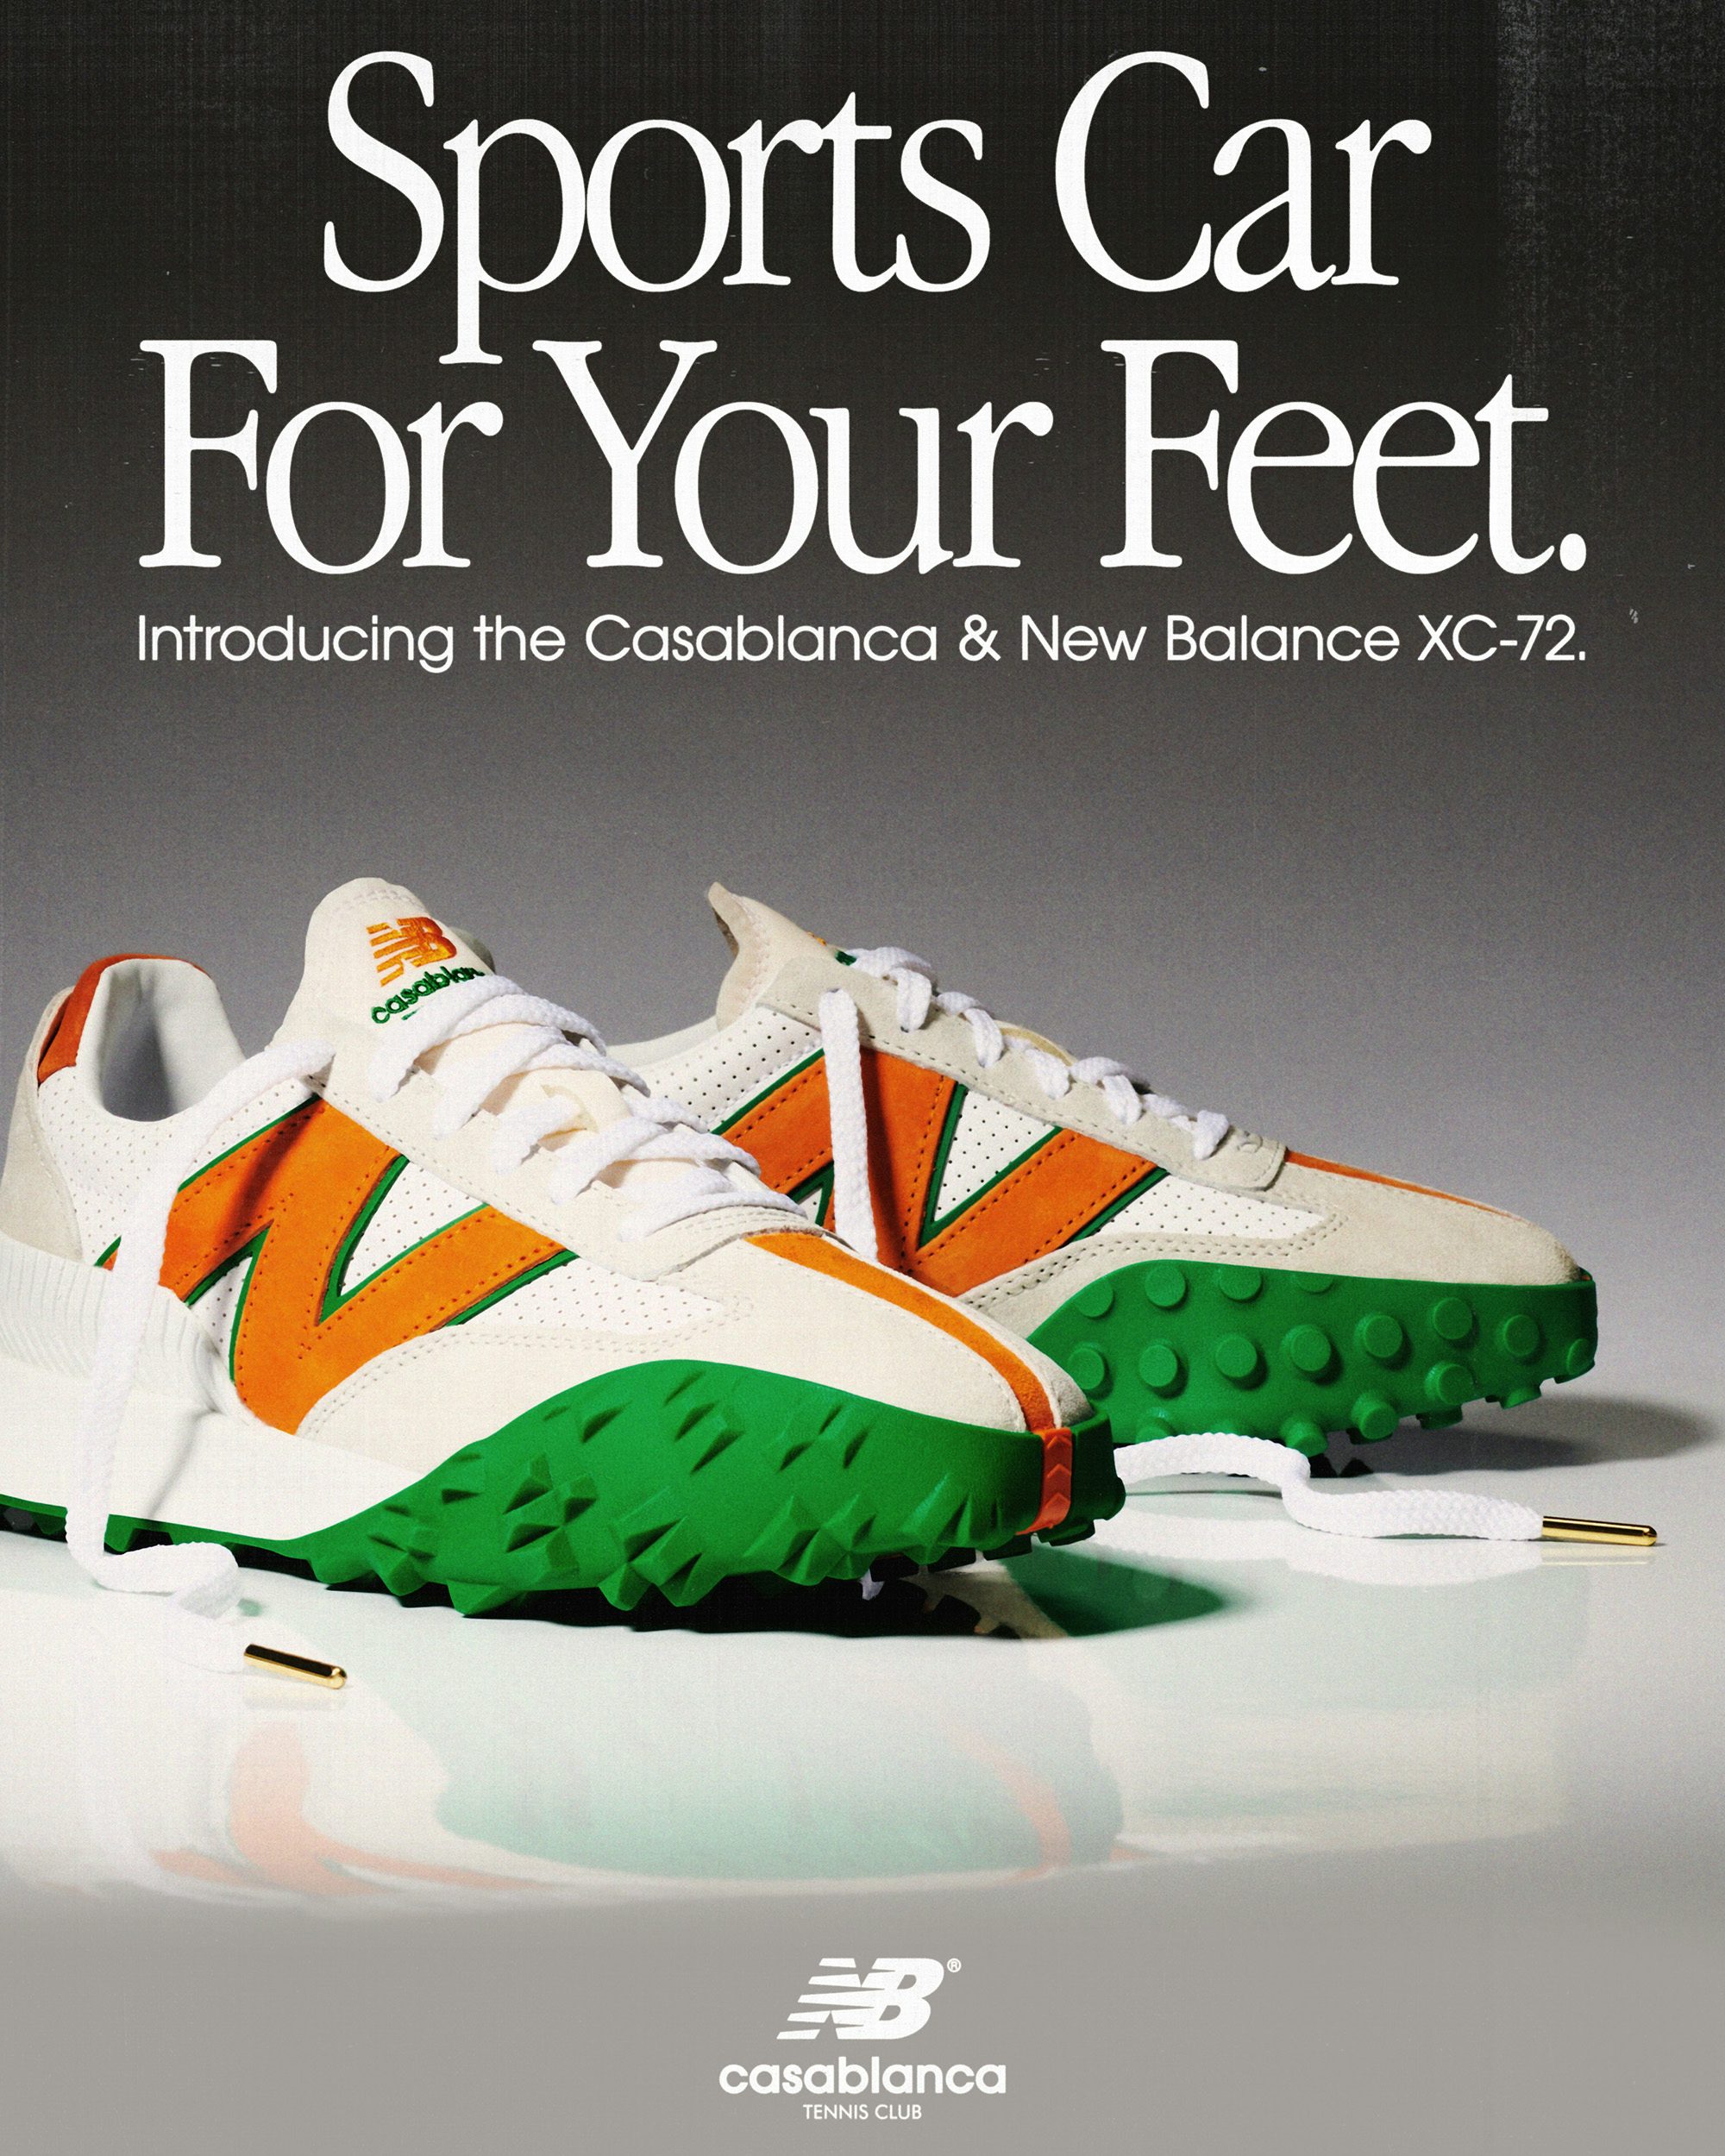 Photograph of white, orange and green New Balance trainers made in collaboration with Casablance